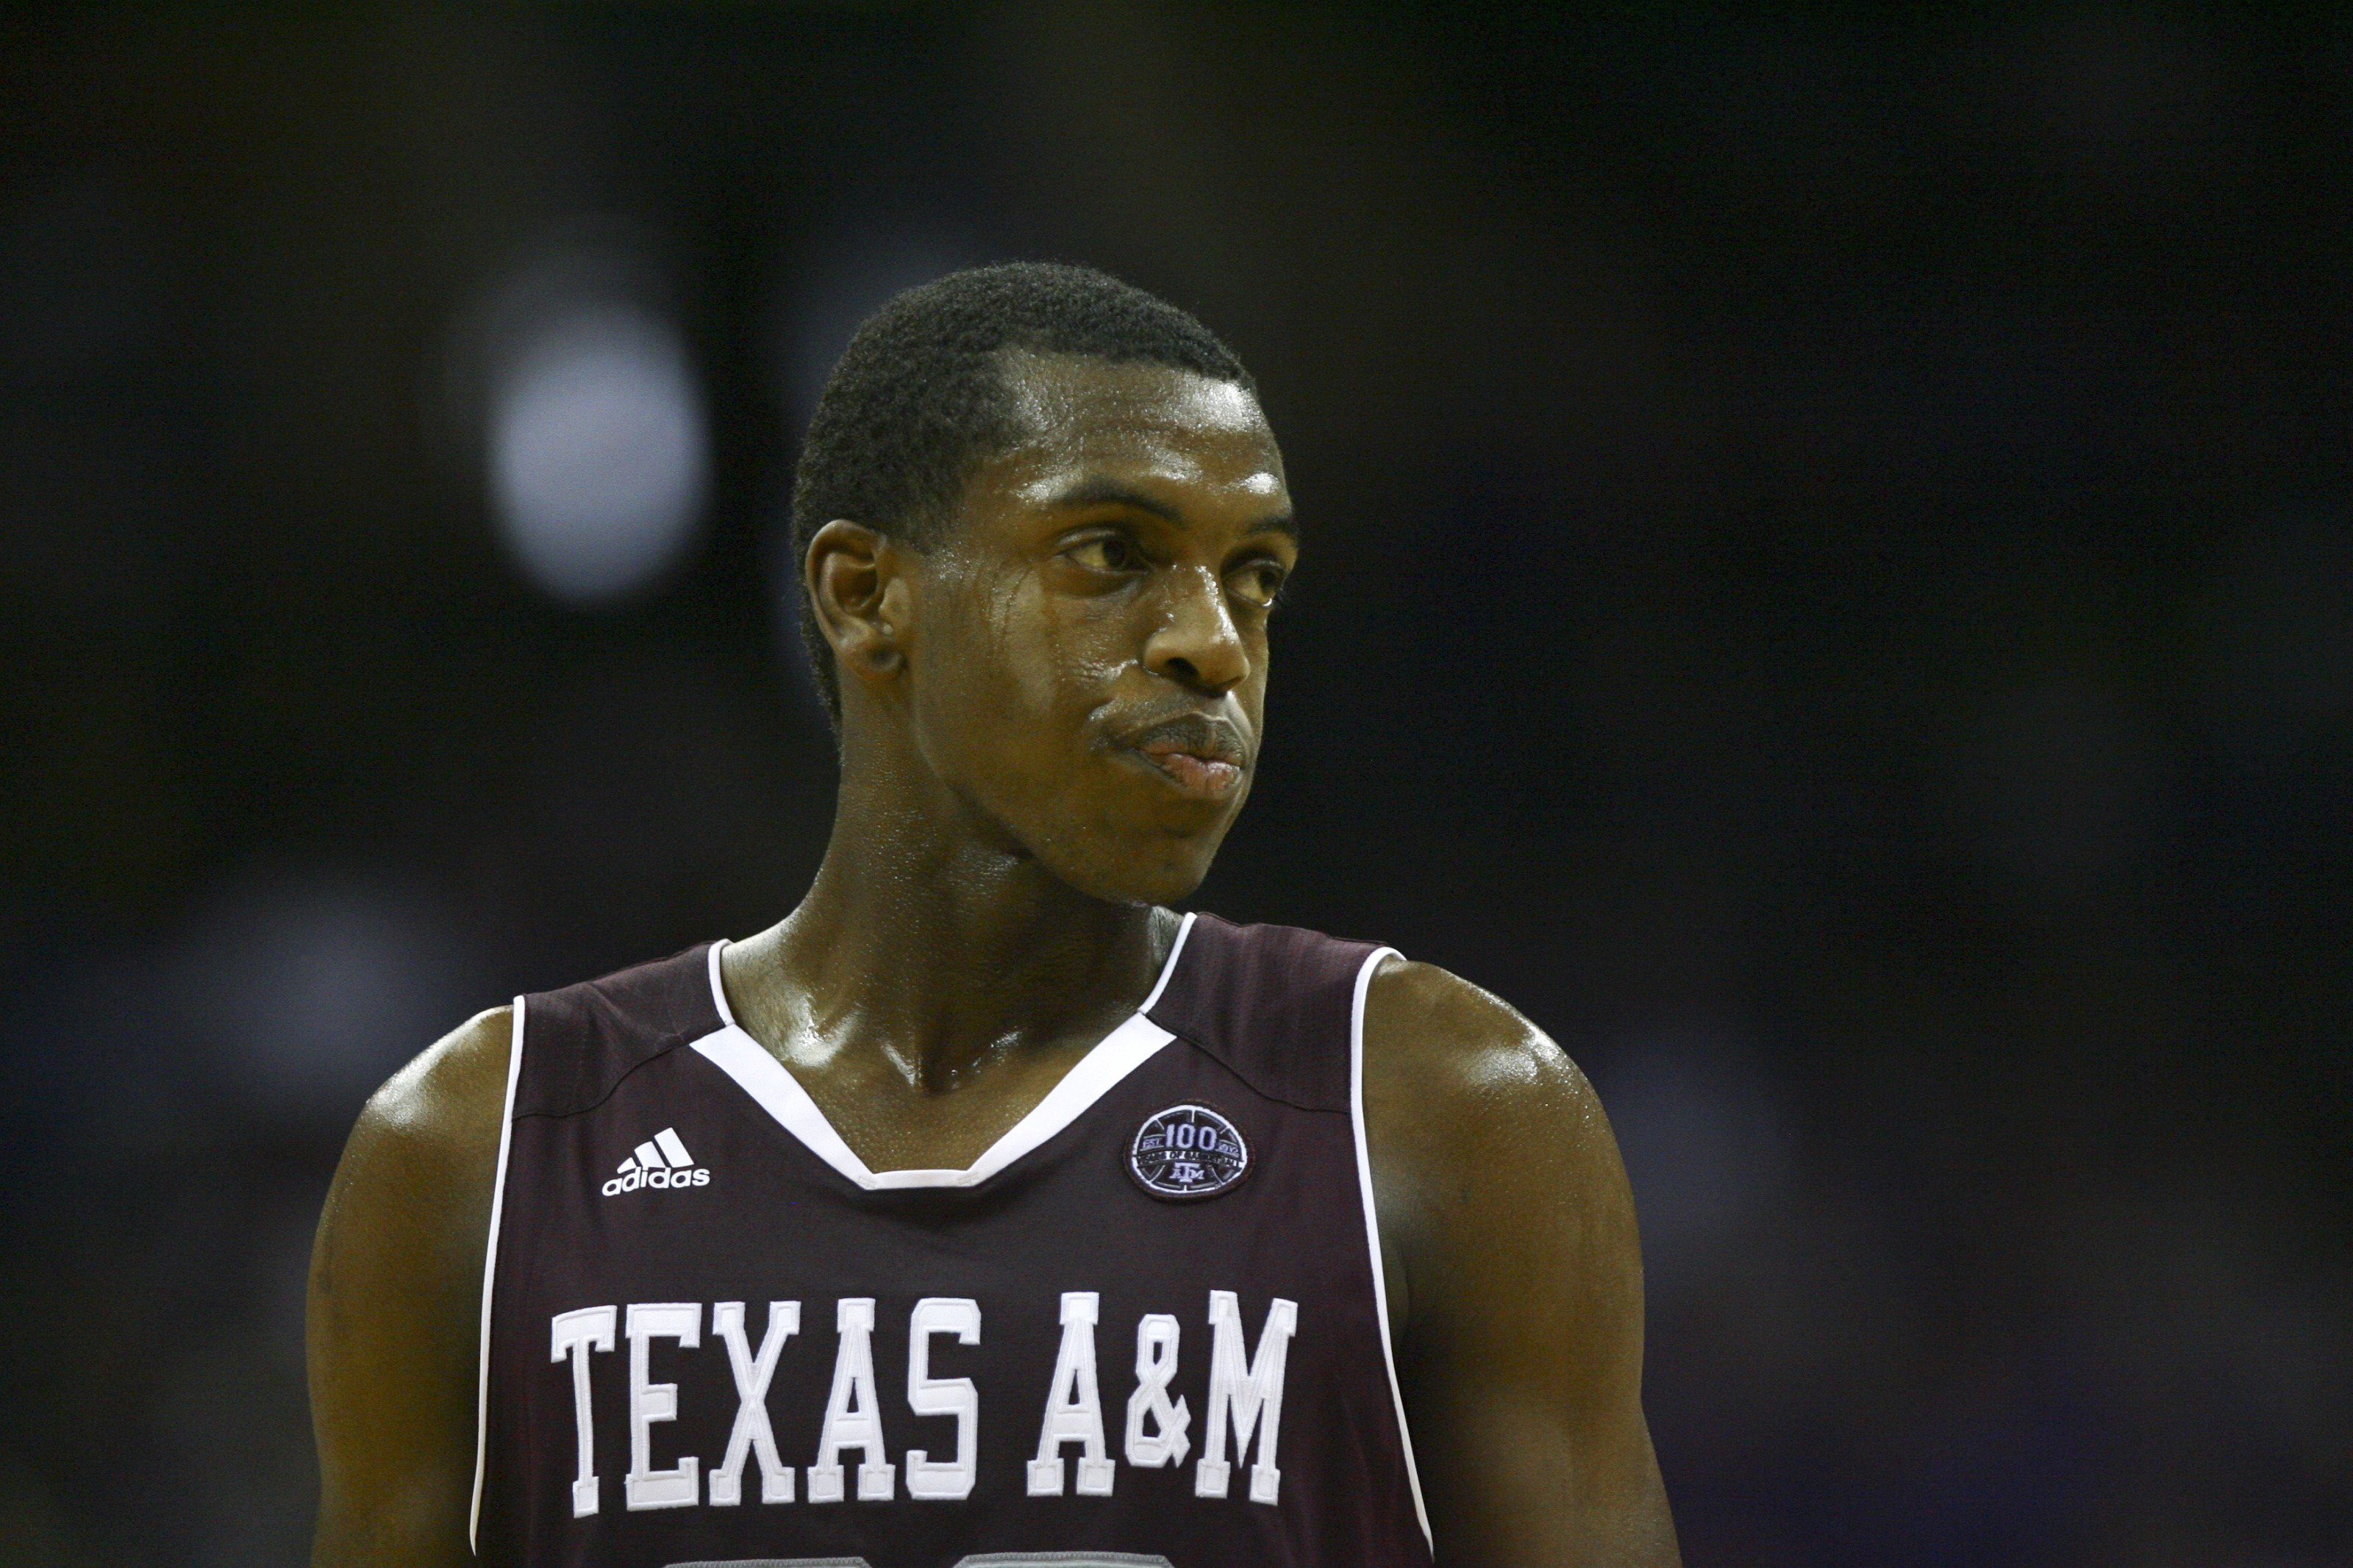 Former Texas A&M Basketball star is taking over the NBA Playoffs